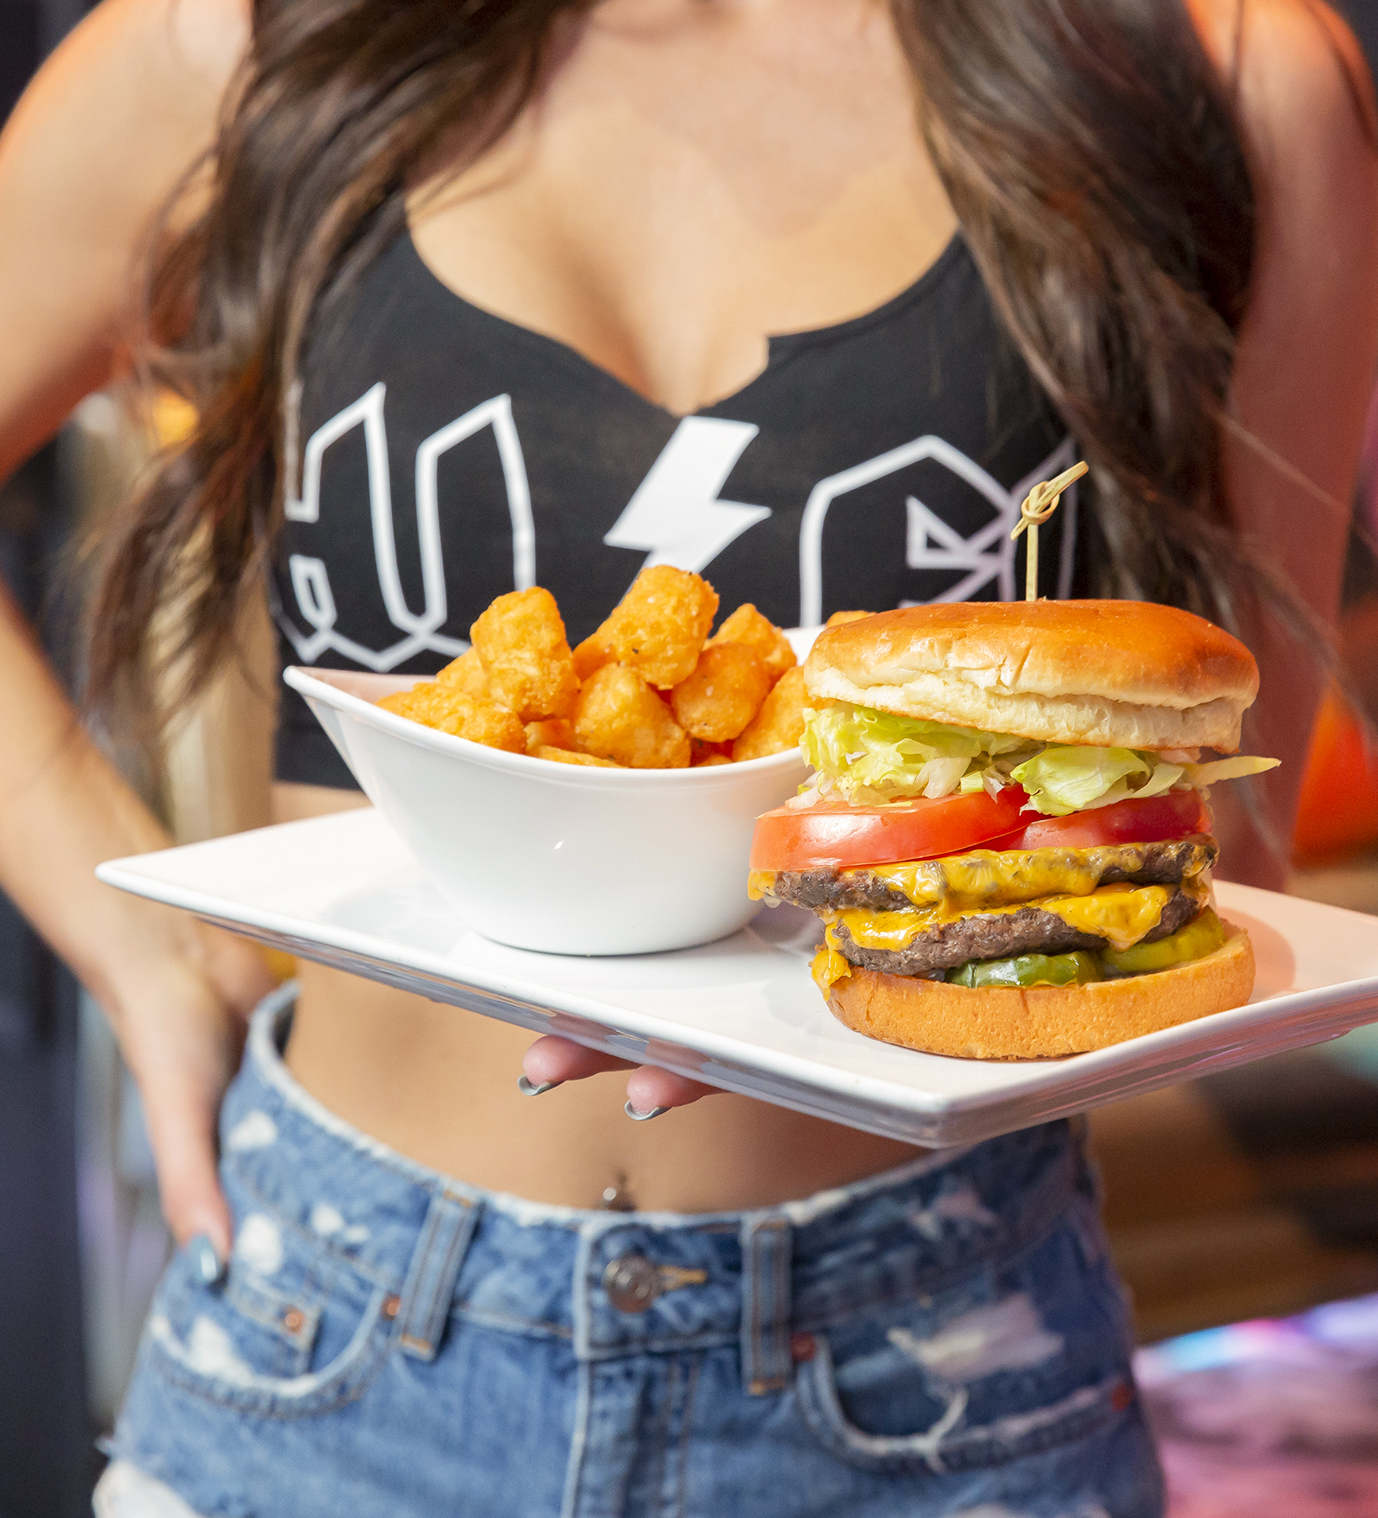 Woman Holding Burger and Tater Tots